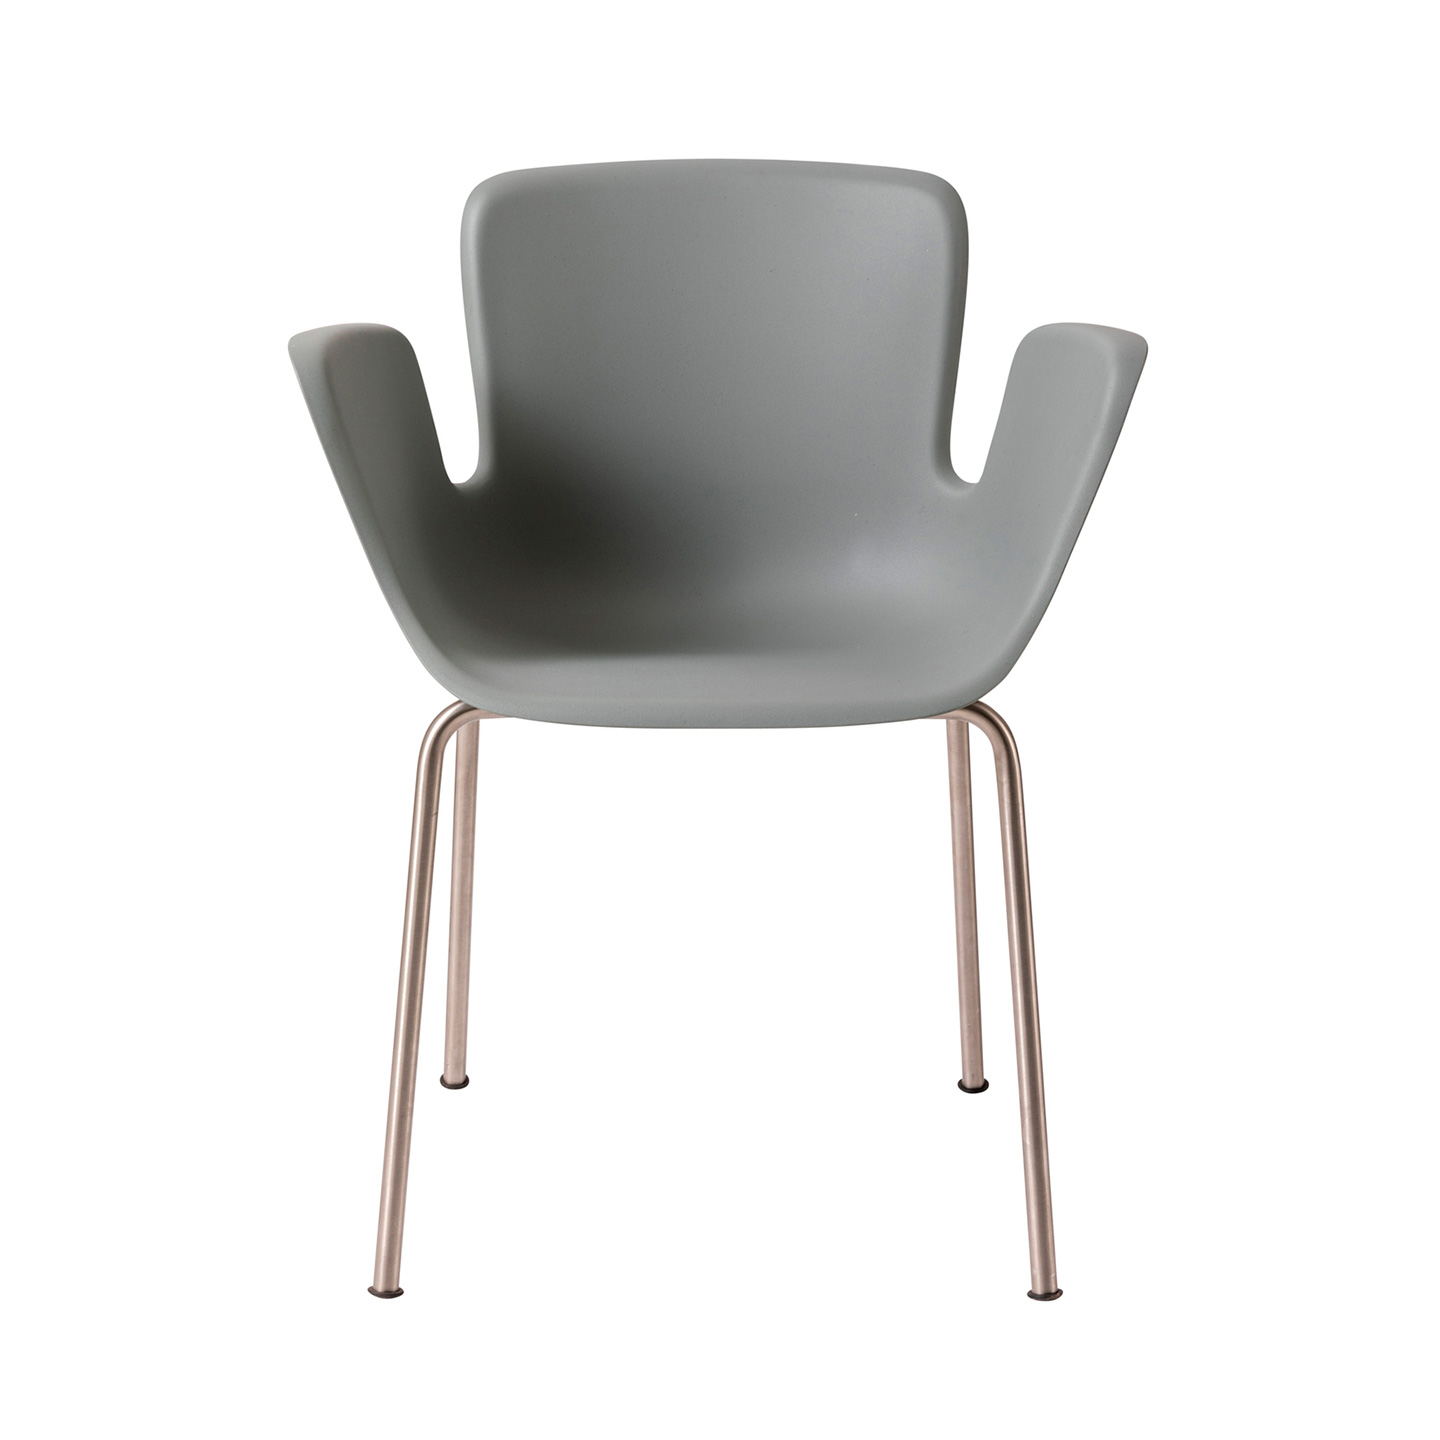 Juli Re-Plastic is the four-leg base outdoor chair made of stainless steel and the shell is realized with recycled and recyclable polypropylene reinforced with fibreglass. 